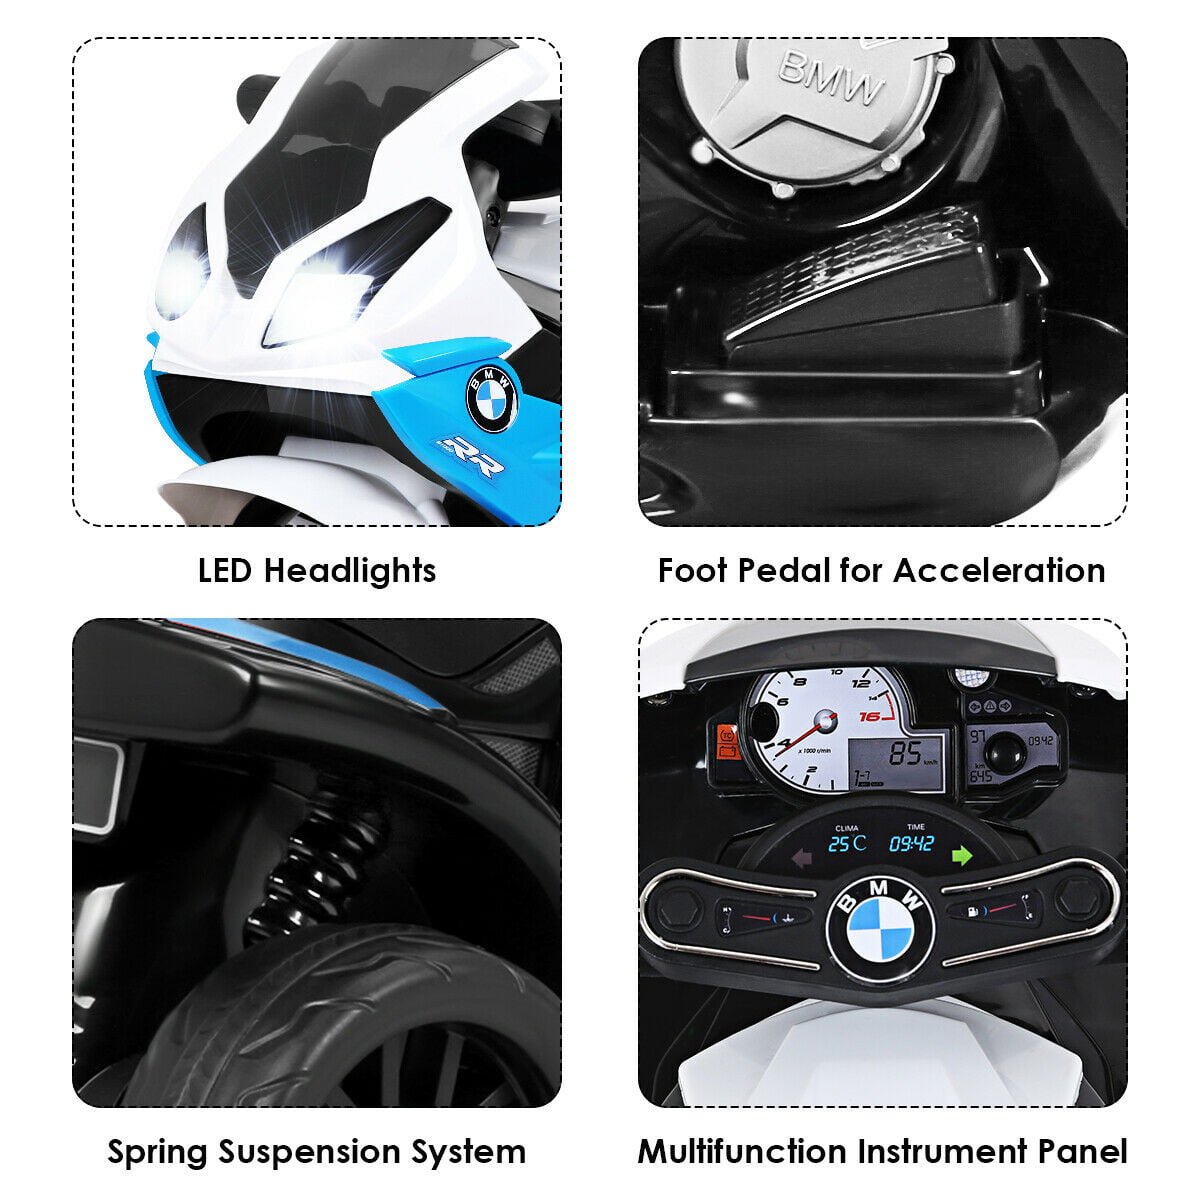 gymax kids ride on motorcycle bmw licensed 6v electric 3 wheels bicycle w music light walmart com walmart com gymax kids ride on motorcycle bmw licensed 6v electric 3 wheels bicycle w music light